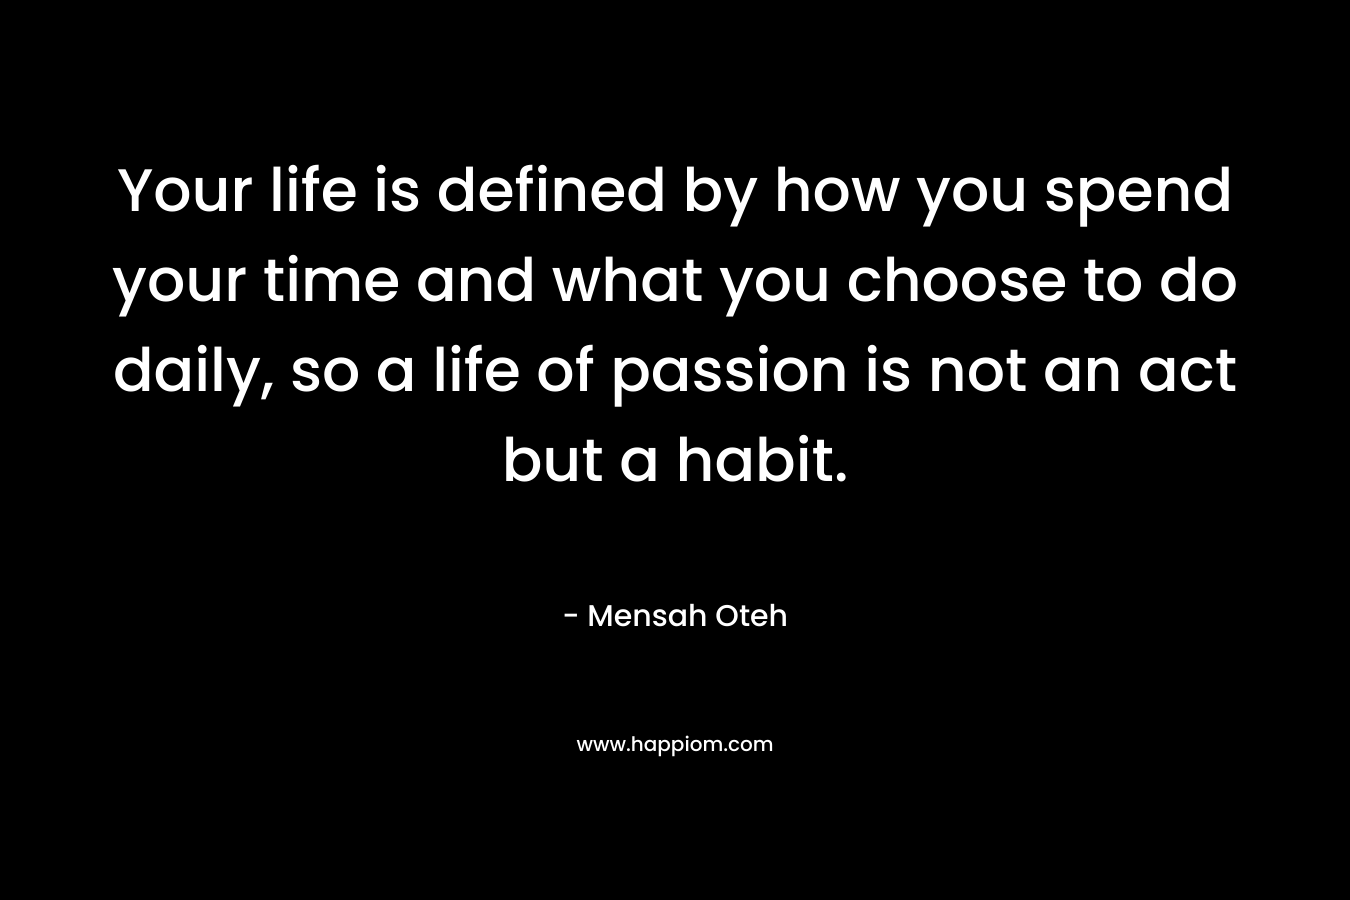 Your life is defined by how you spend your time and what you choose to do daily, so a life of passion is not an act but a habit.